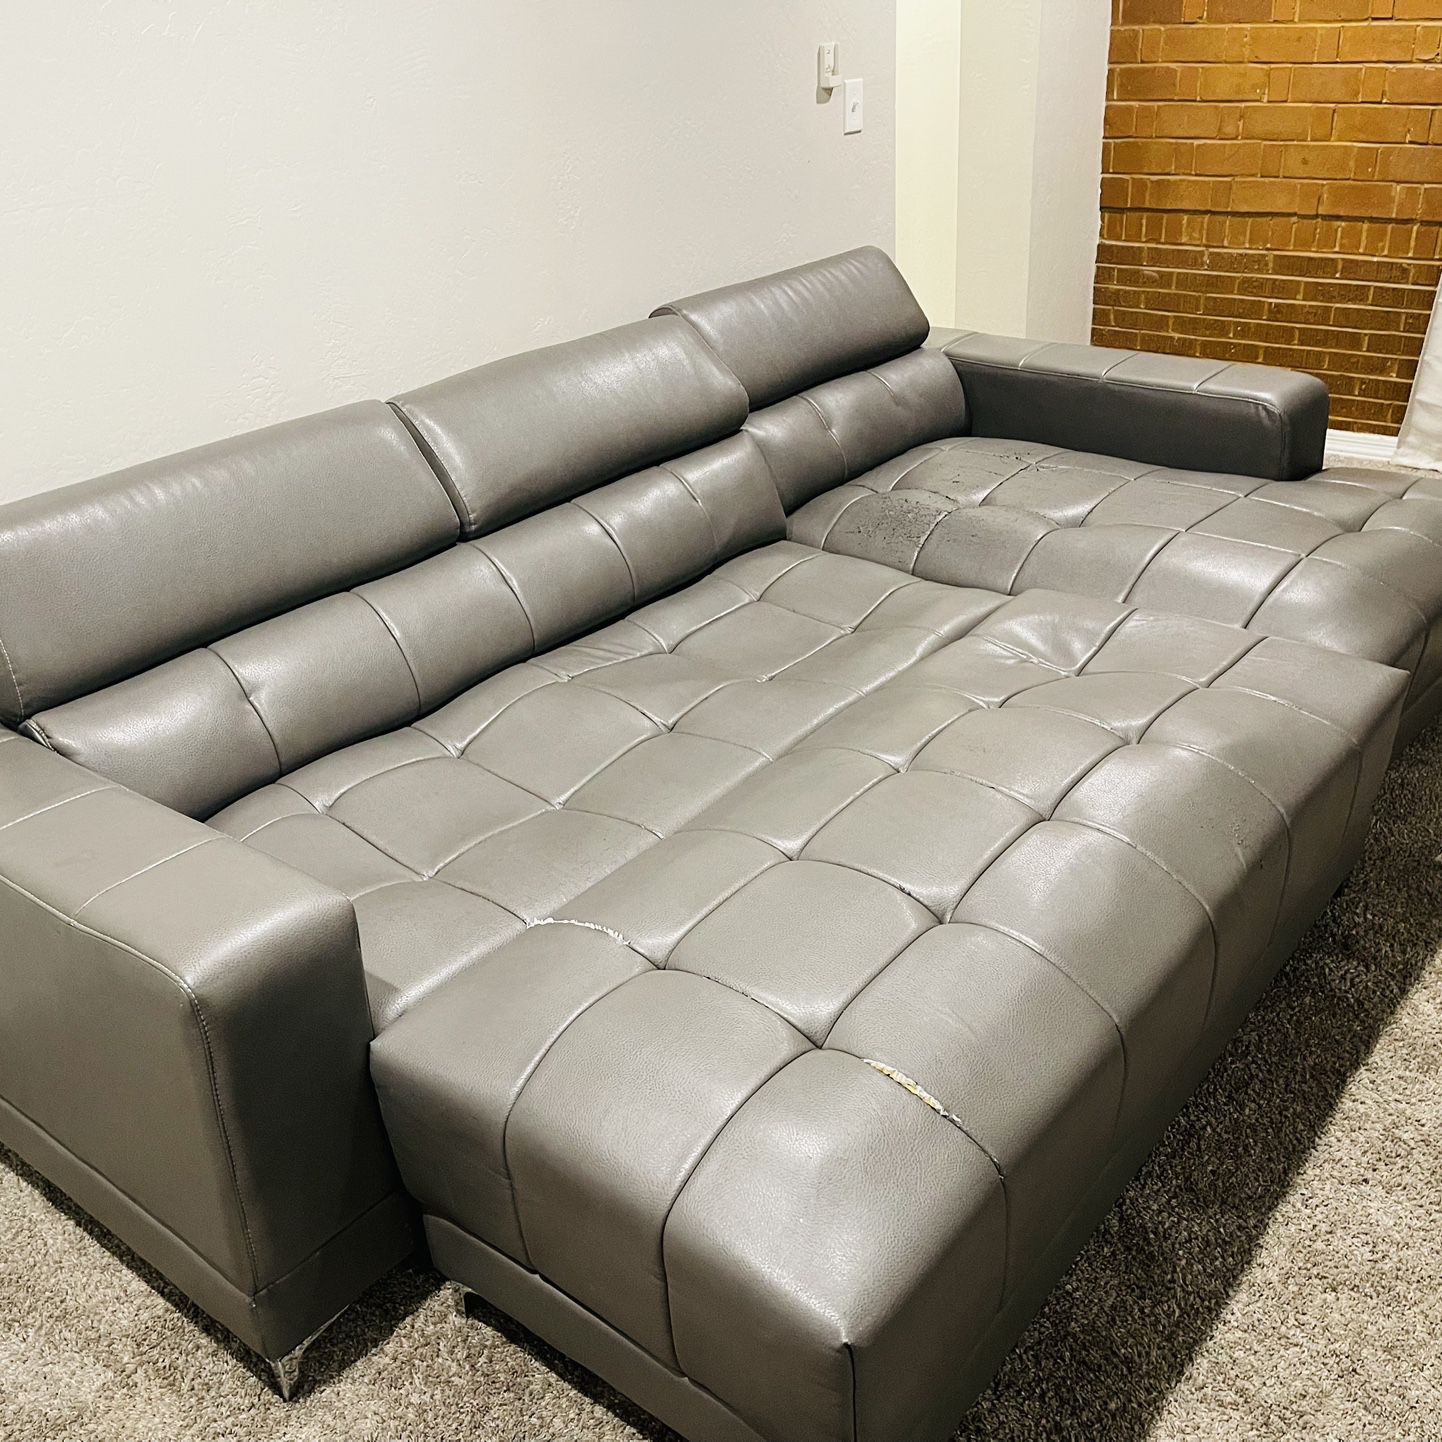 BEST OFFER Sofa with Large Ottoman & Adjustable Headrests